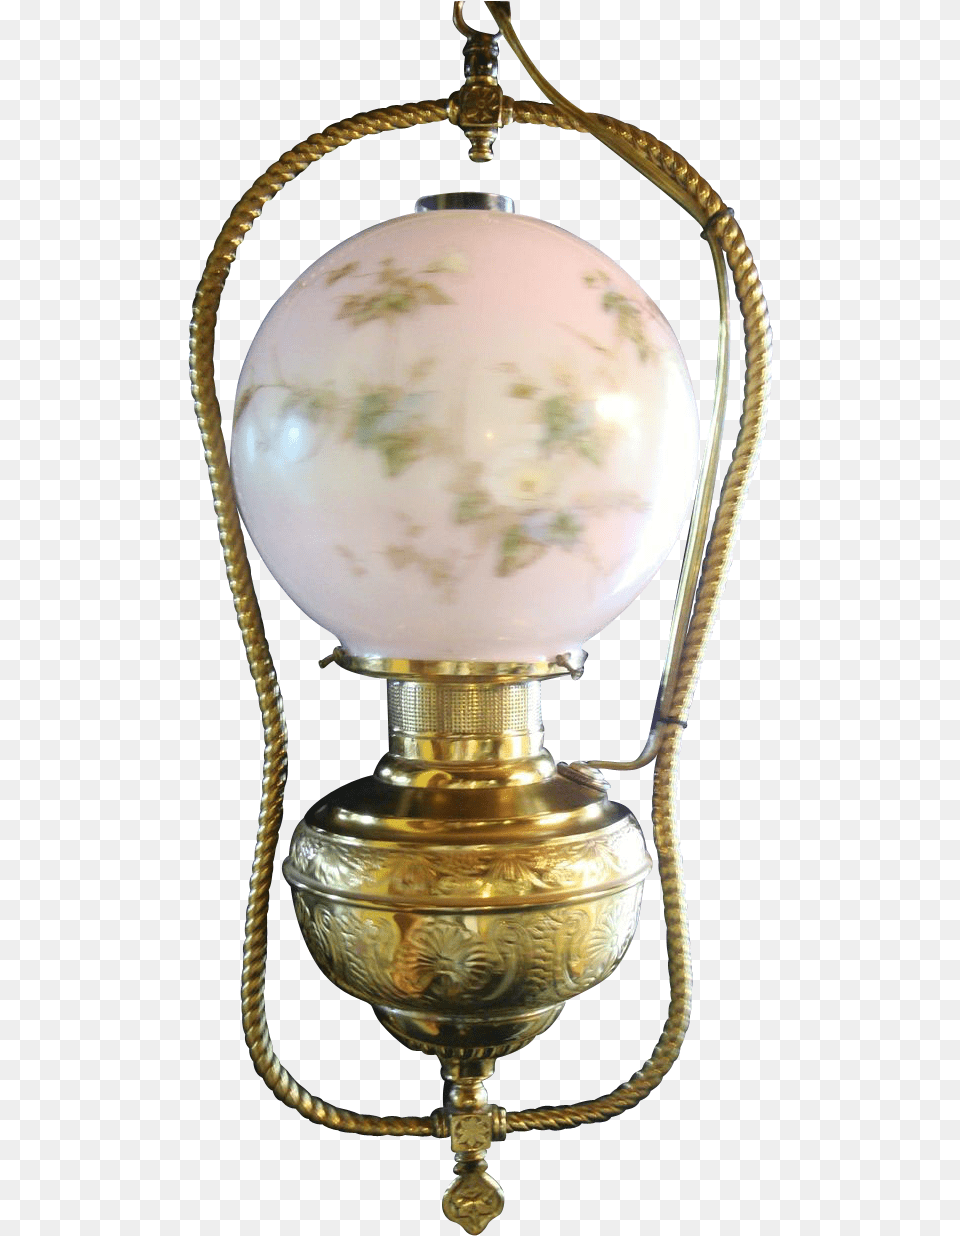 Brass, Lamp, Lampshade, Plate Png